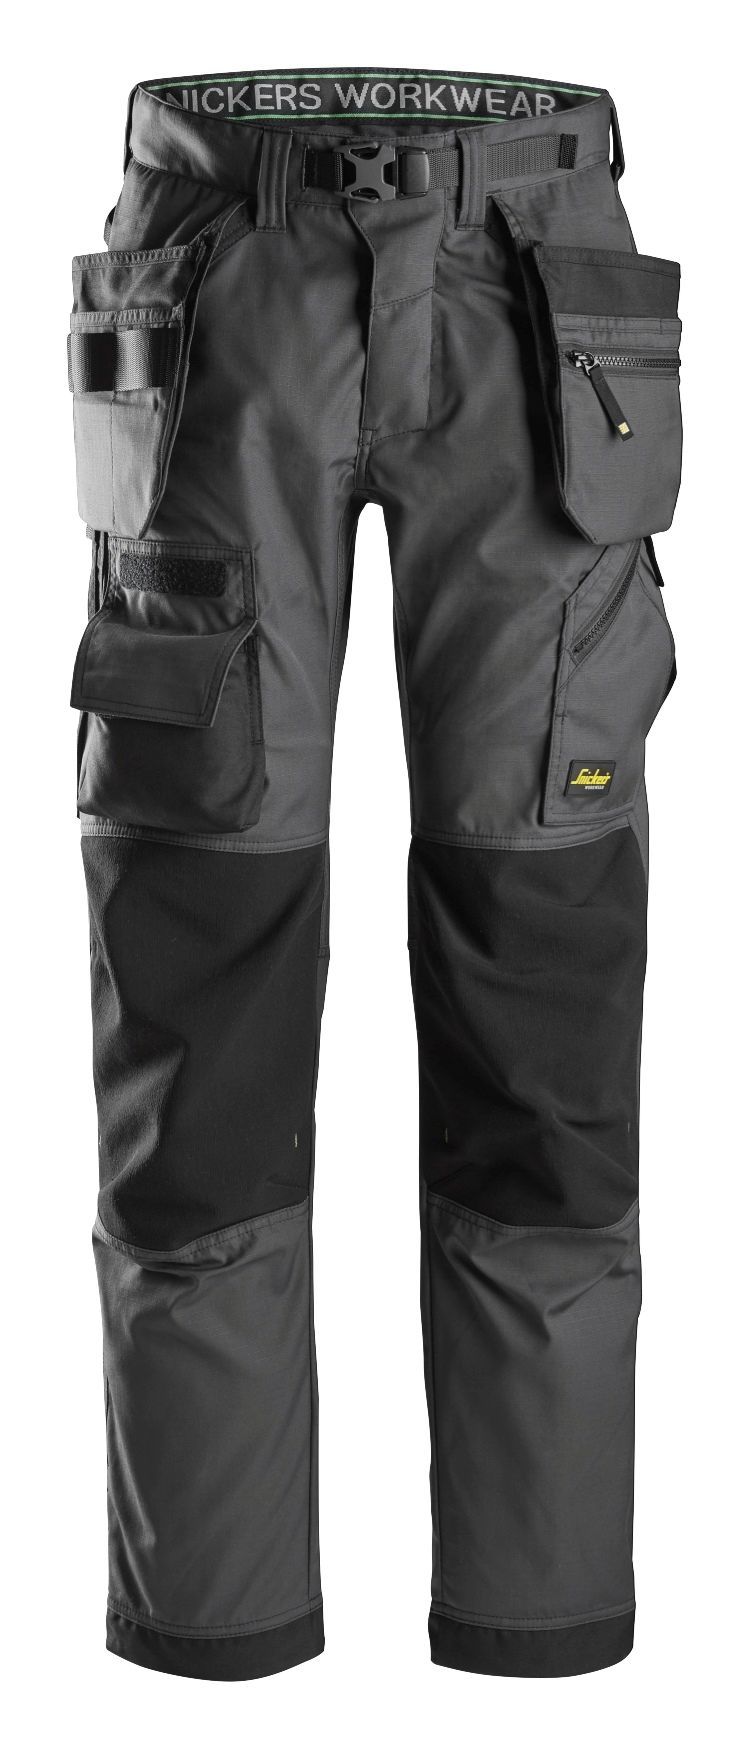 Snickers 6905 Flexi Work 3/4 Length Pirate Trousers+ with Holster Pockets